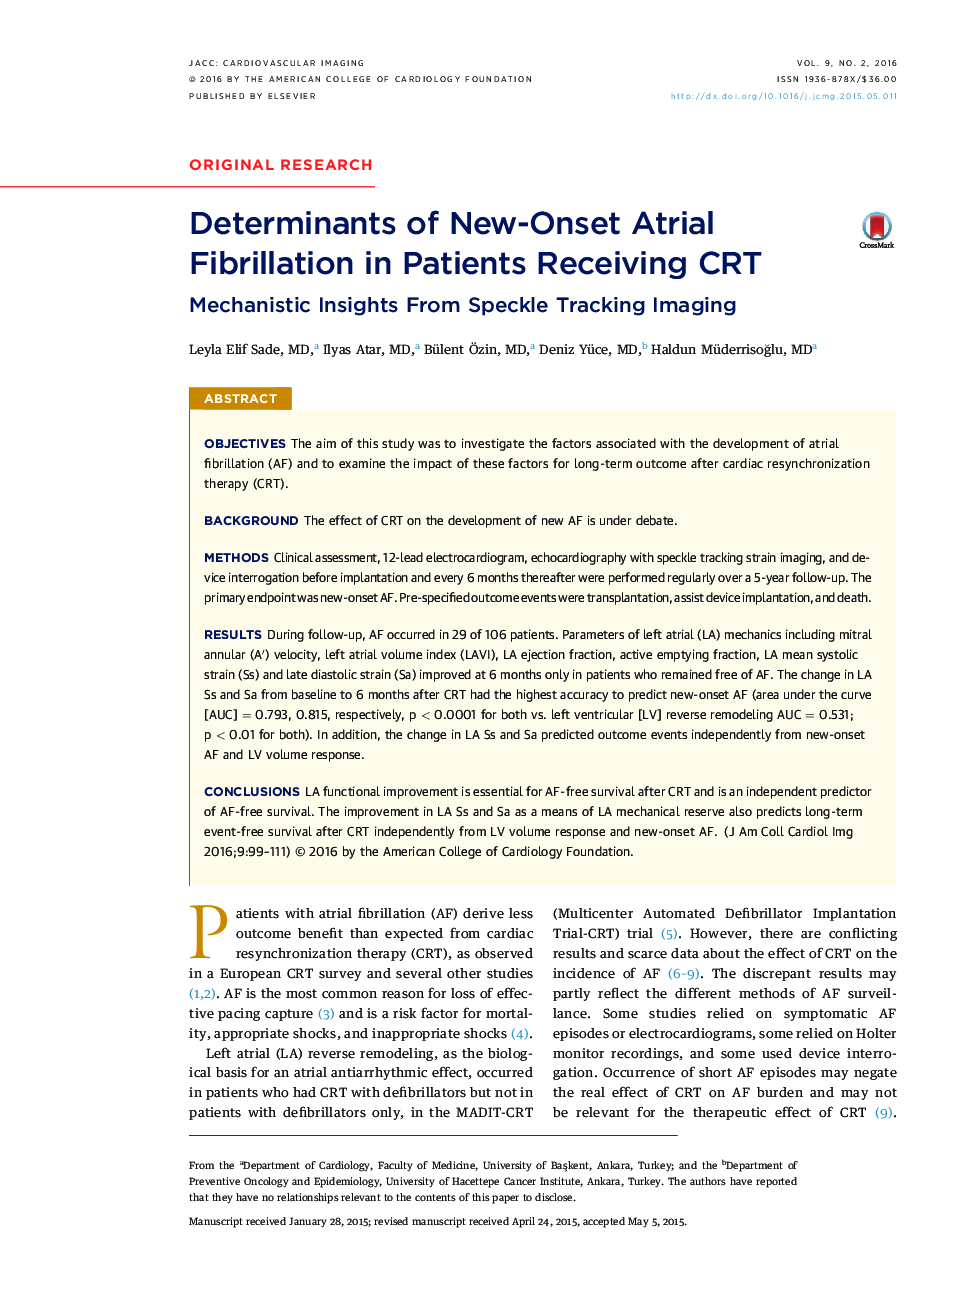 Determinants of New-Onset Atrial Fibrillation in Patients Receiving CRT : Mechanistic Insights From Speckle Tracking Imaging